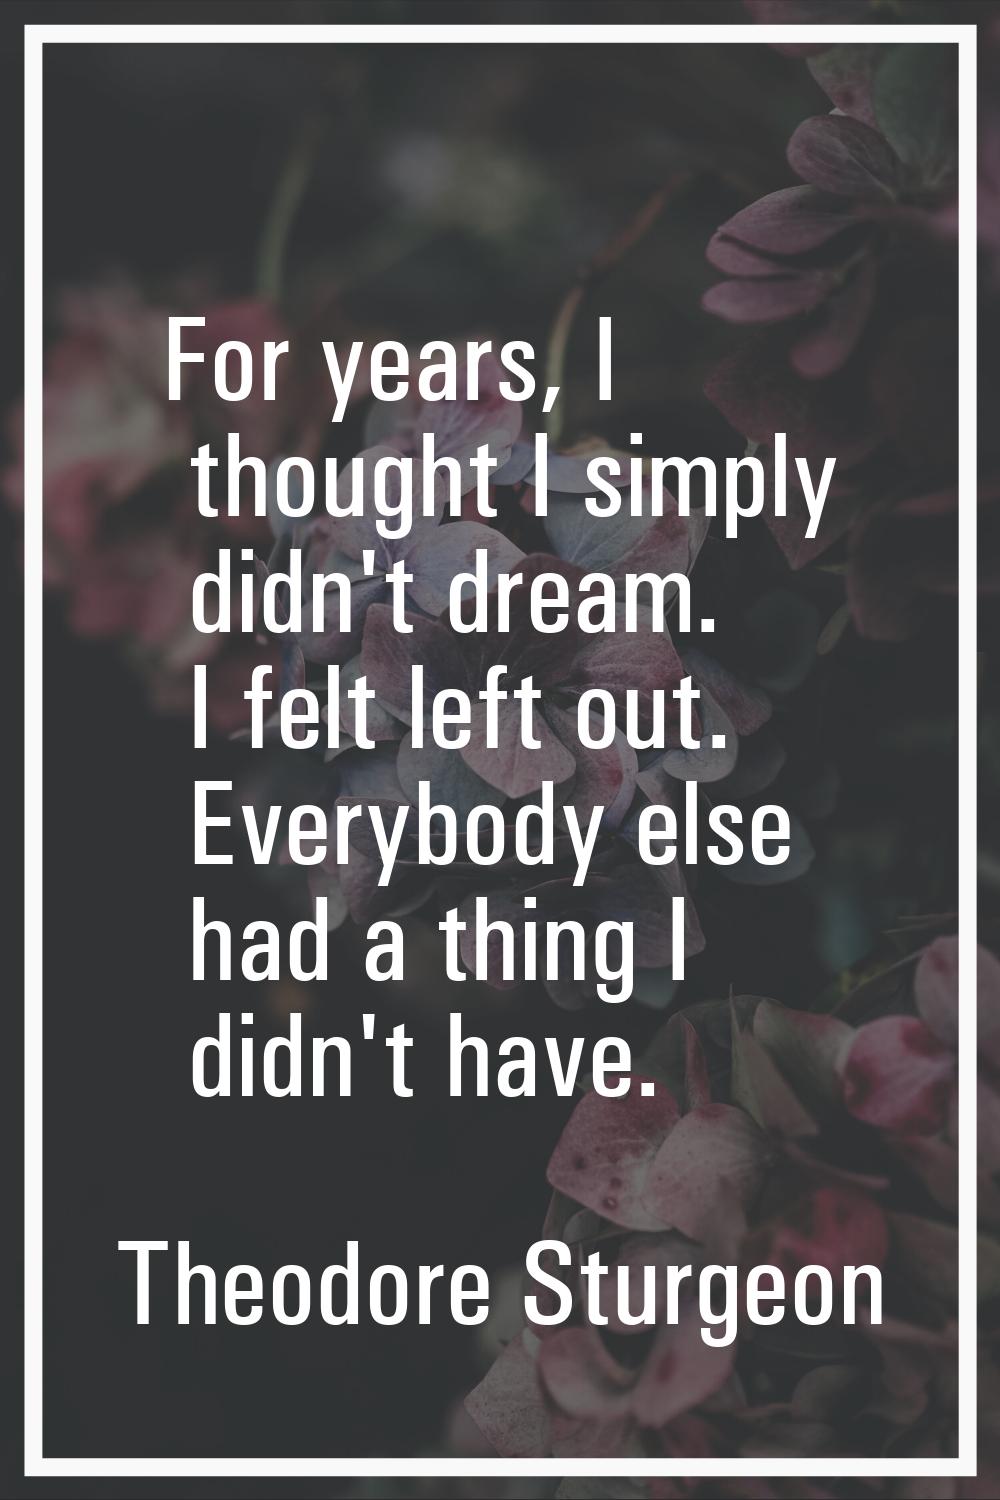 For years, I thought I simply didn't dream. I felt left out. Everybody else had a thing I didn't ha